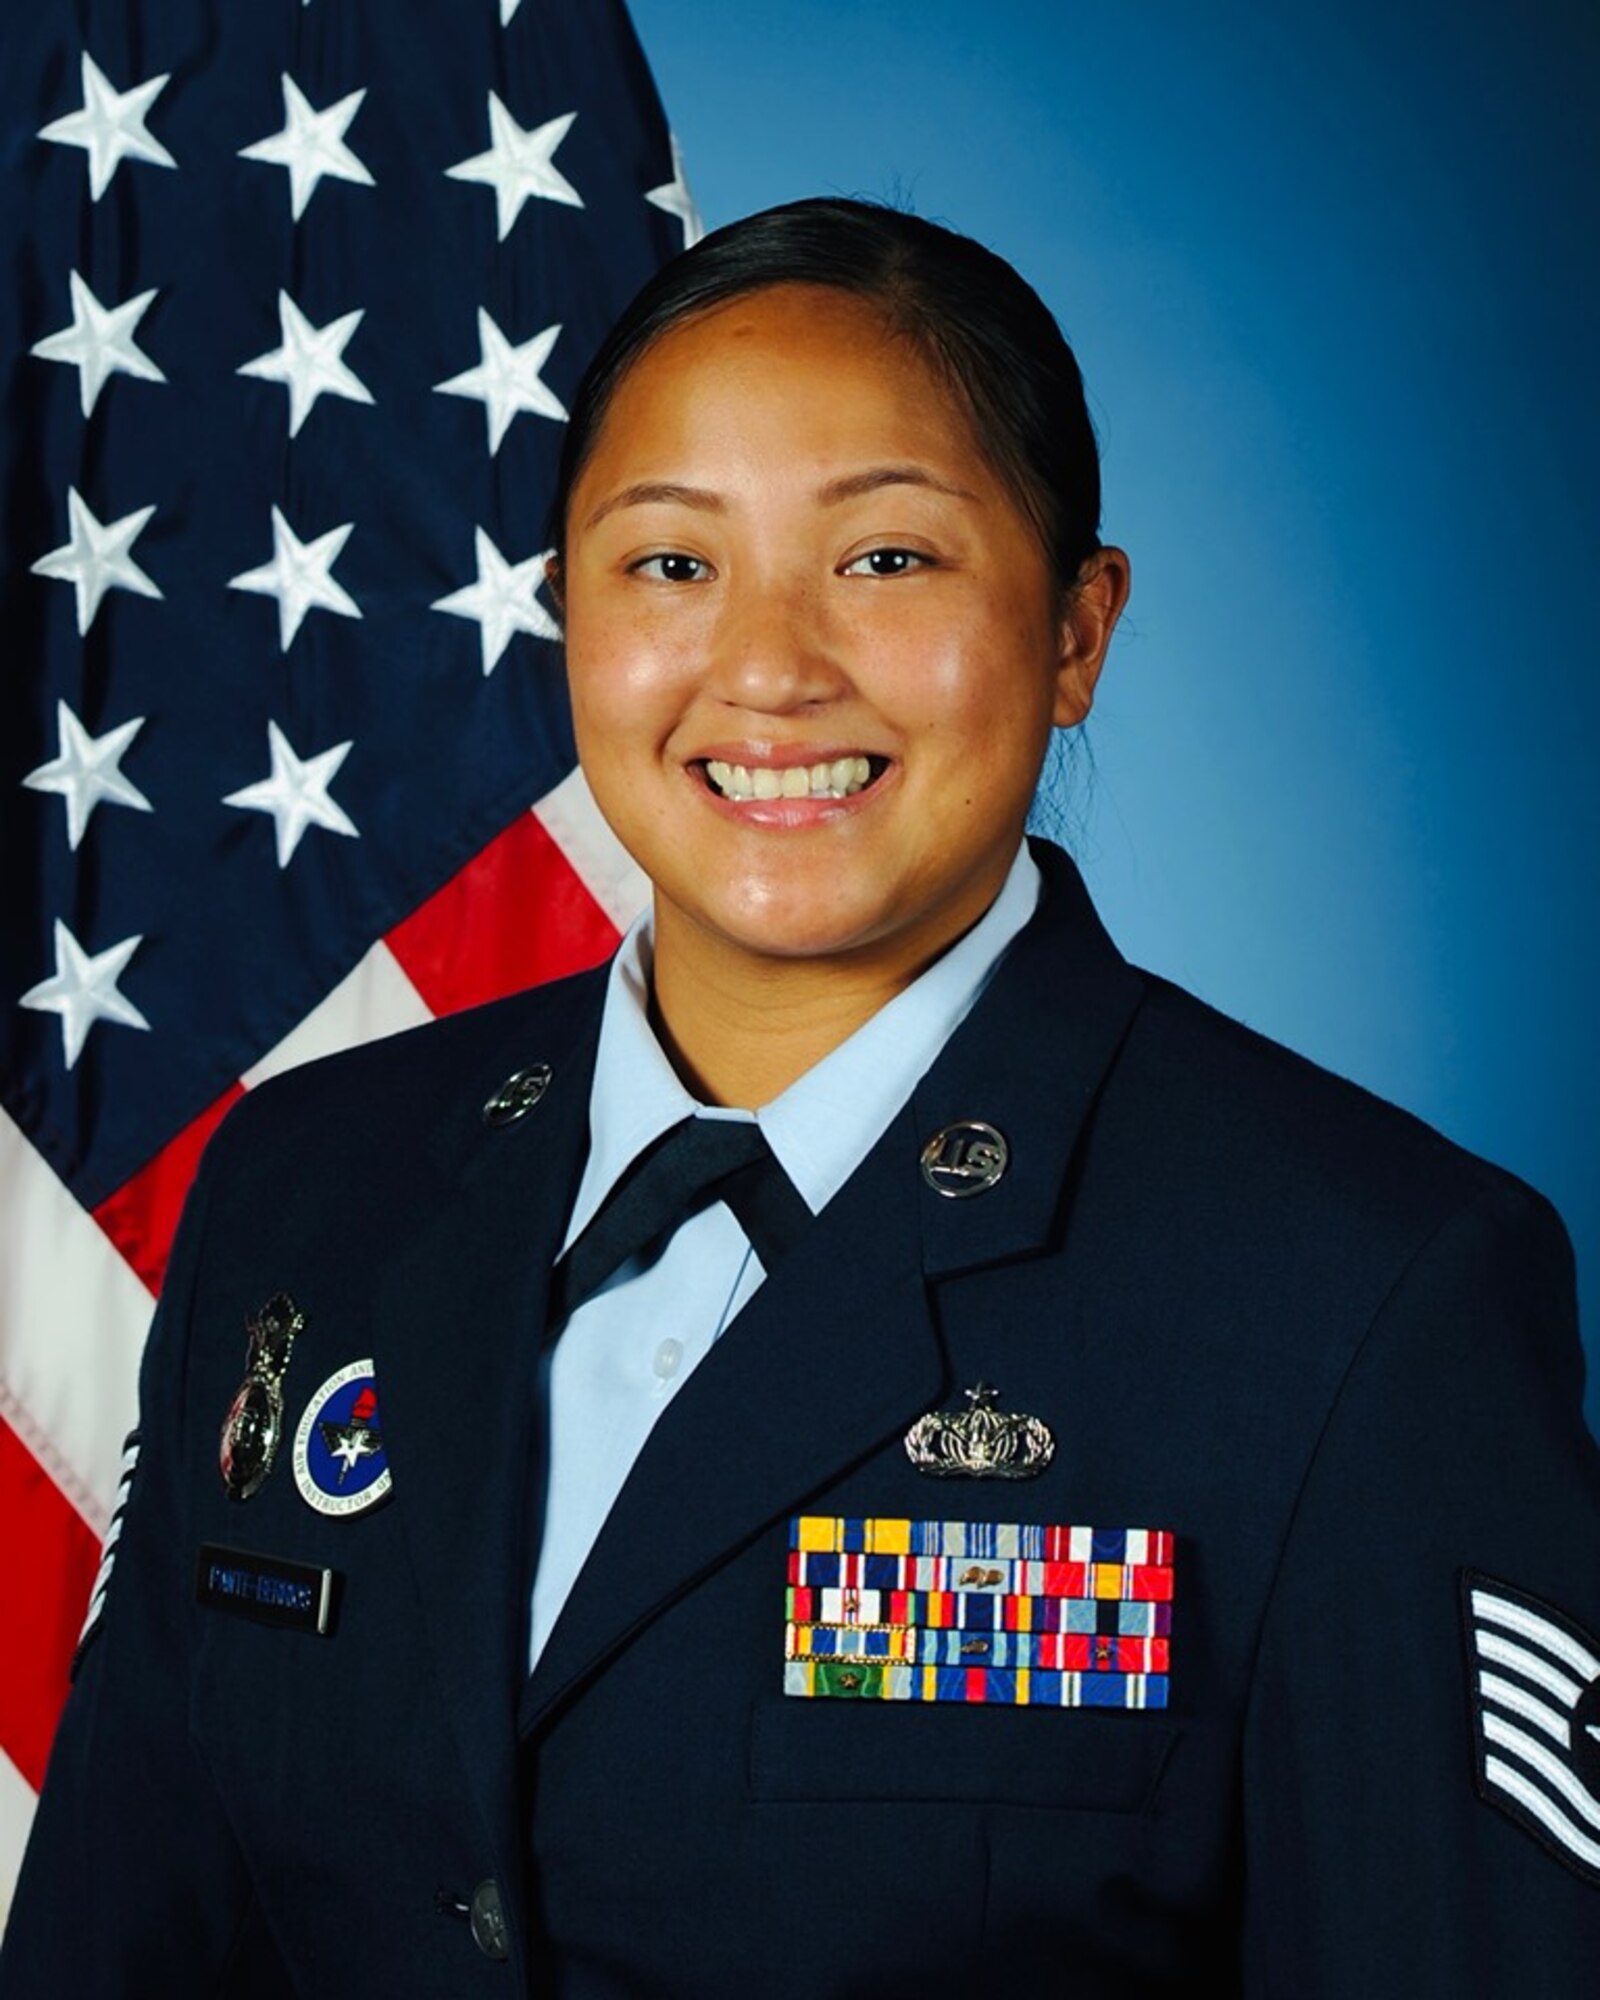 The Uniformed Services Award for the Federal Asian Pacific American Council was awarded to TSgt. Sarahlizamarie Pante-Berrios, April 8, 2020. The award recognizes members of all of the Uniformed Services for fostering harmonious relationships between the services and the Asian and Pacific Islander communities, exhibiting distinguished behavior, and being a leader in overcoming discrimination, promoting equal opportunity, and developing all members of the Civilian and Uniformed Services. (Courtesy Photo)